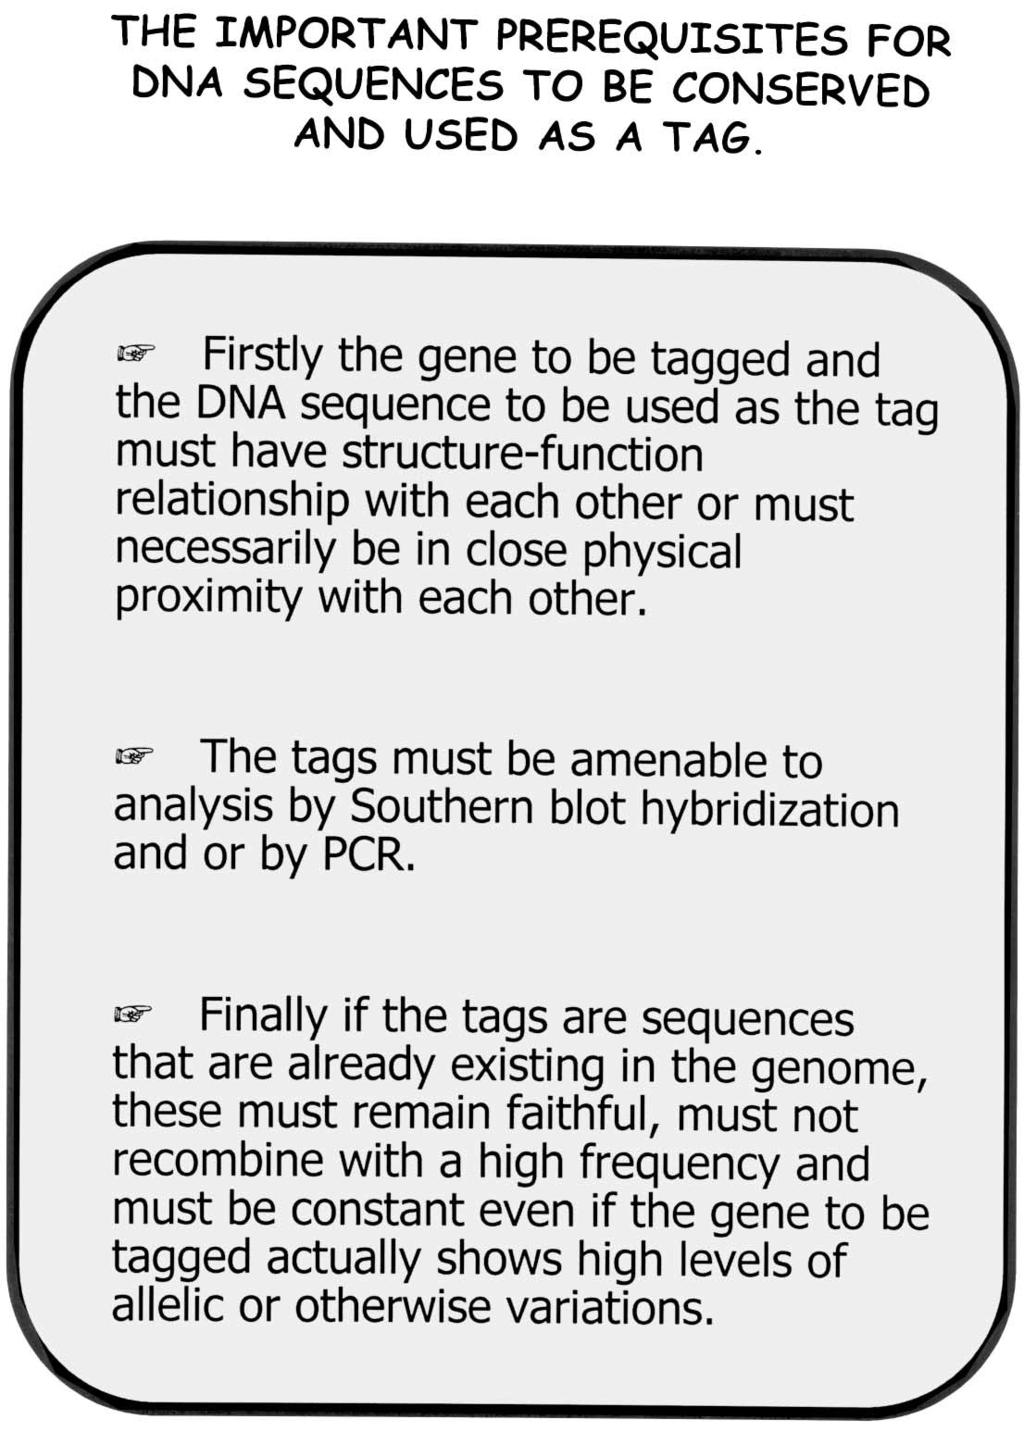 FIGURE 1. The important prerequisites for the use of DNA sequences as gene tags are listed in the textbox.